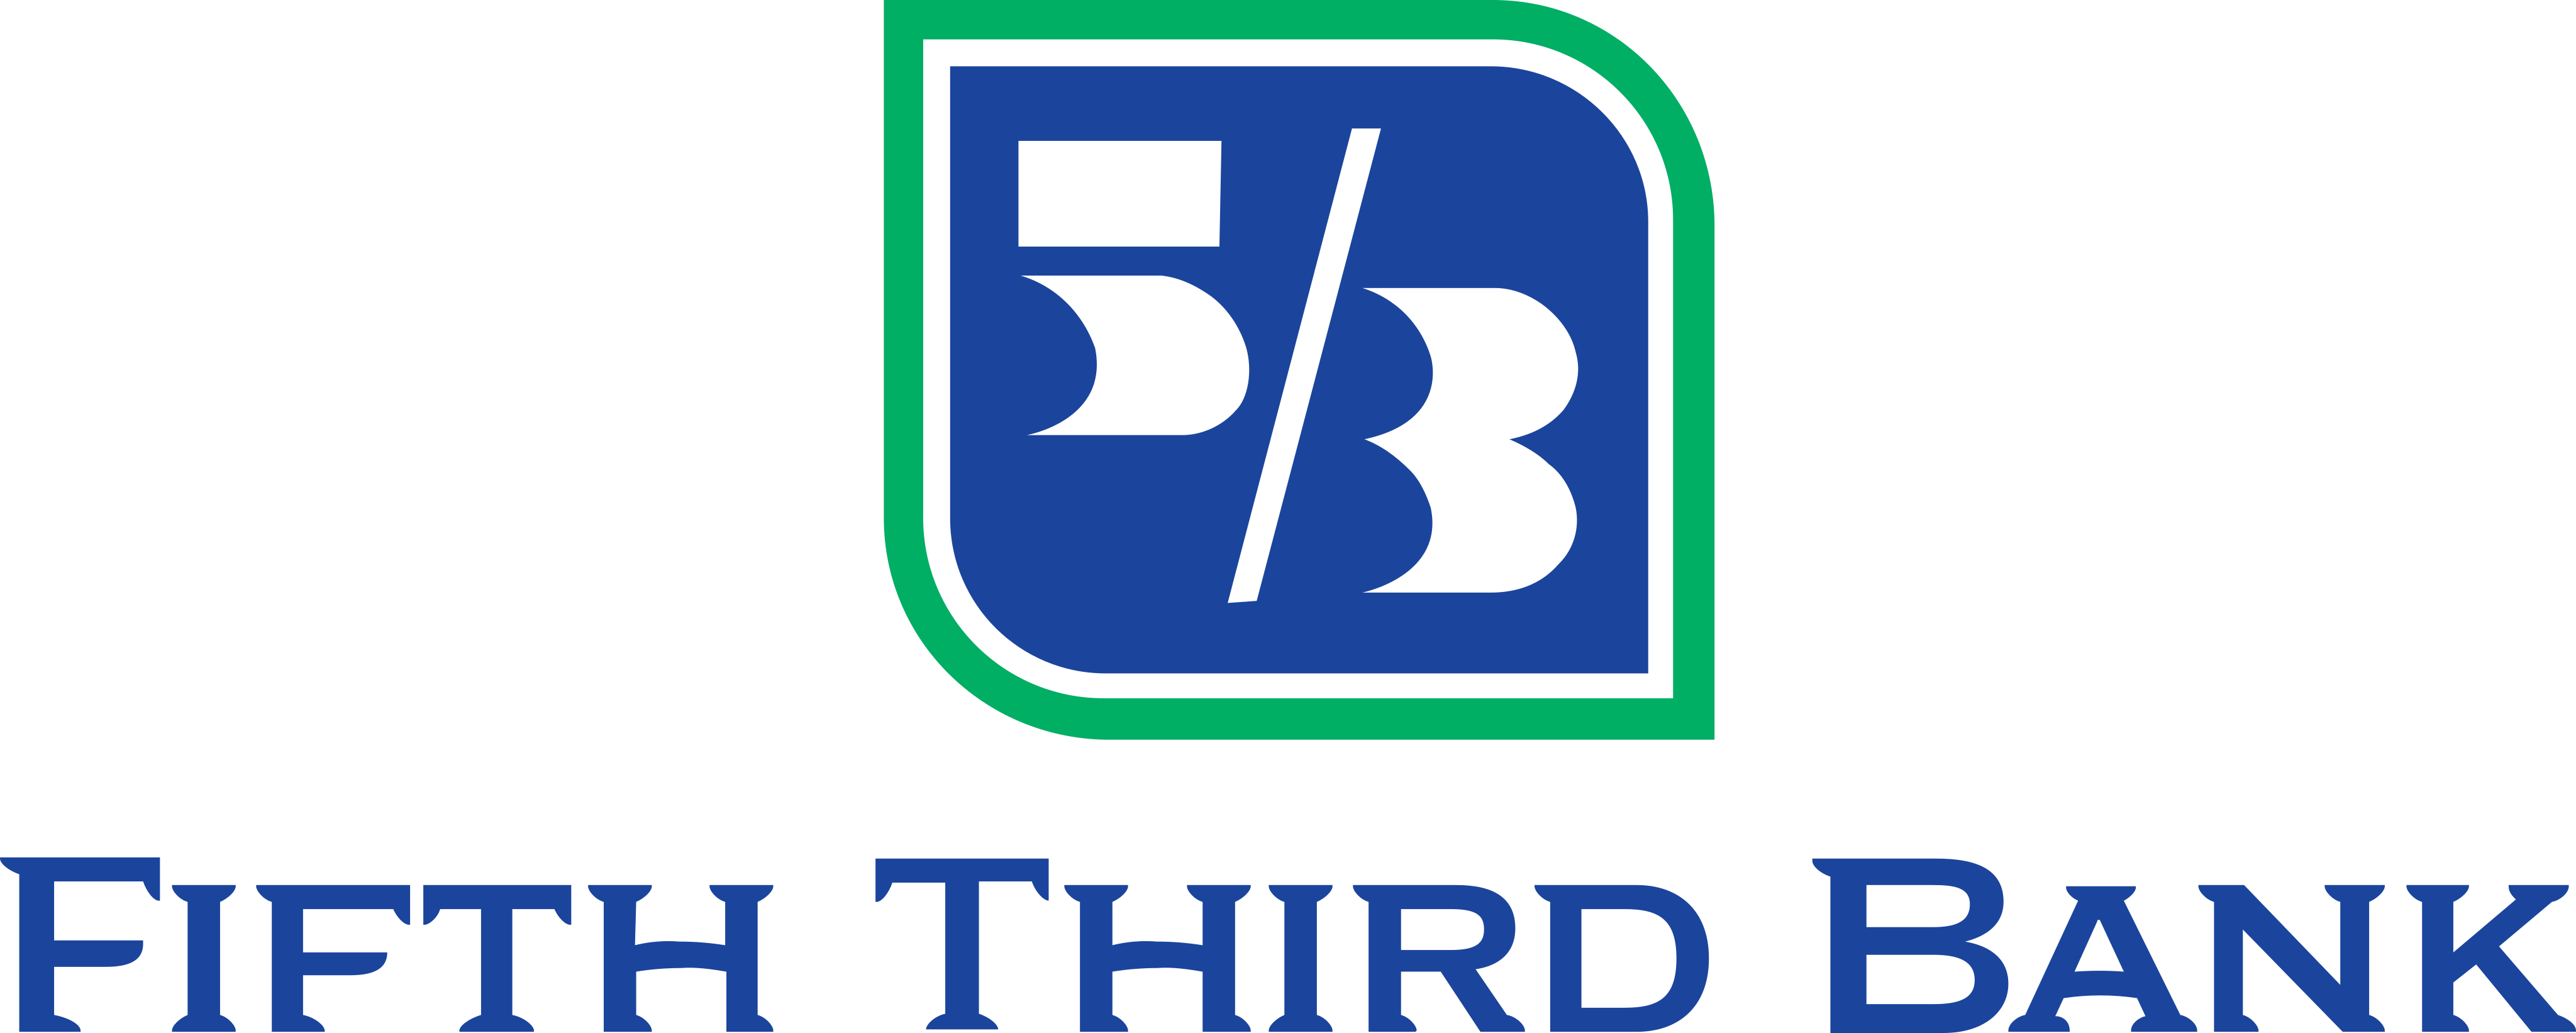 Fifth Third Bank Logo And Tagline | My XXX Hot Girl